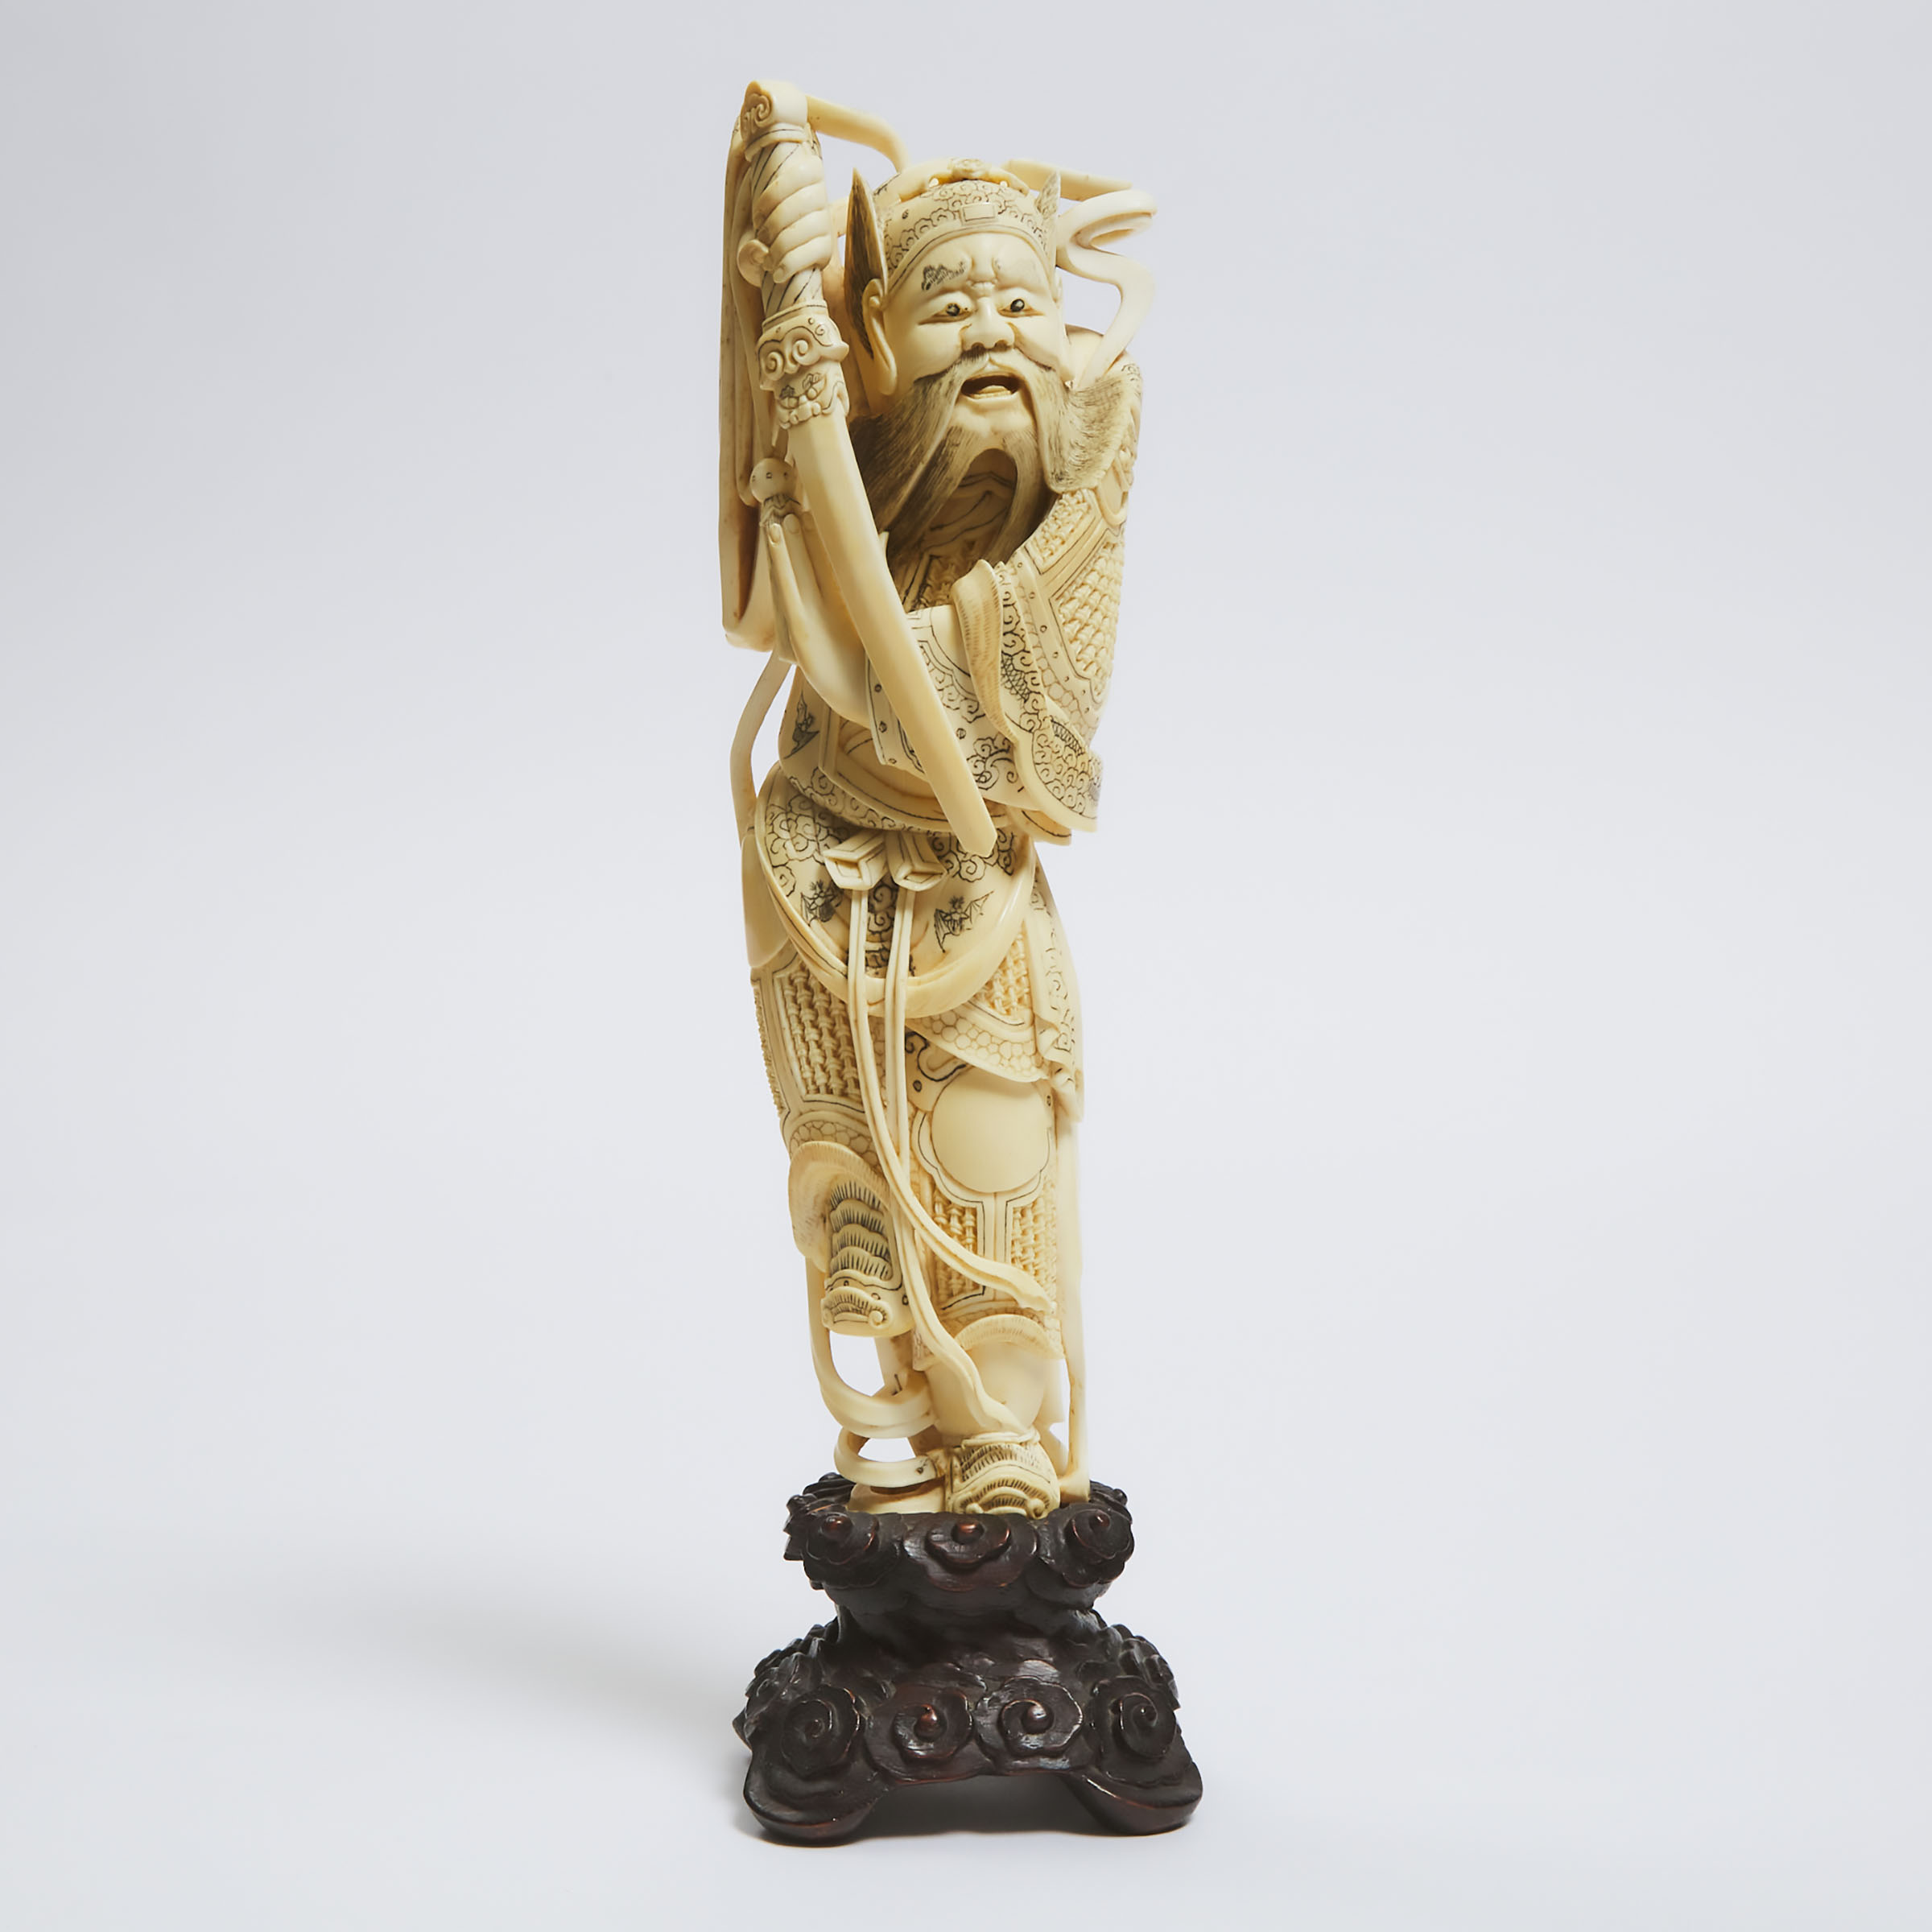 A Chinese Ivory Figure of Zhong Kui, Late 19th/Early 20th Century